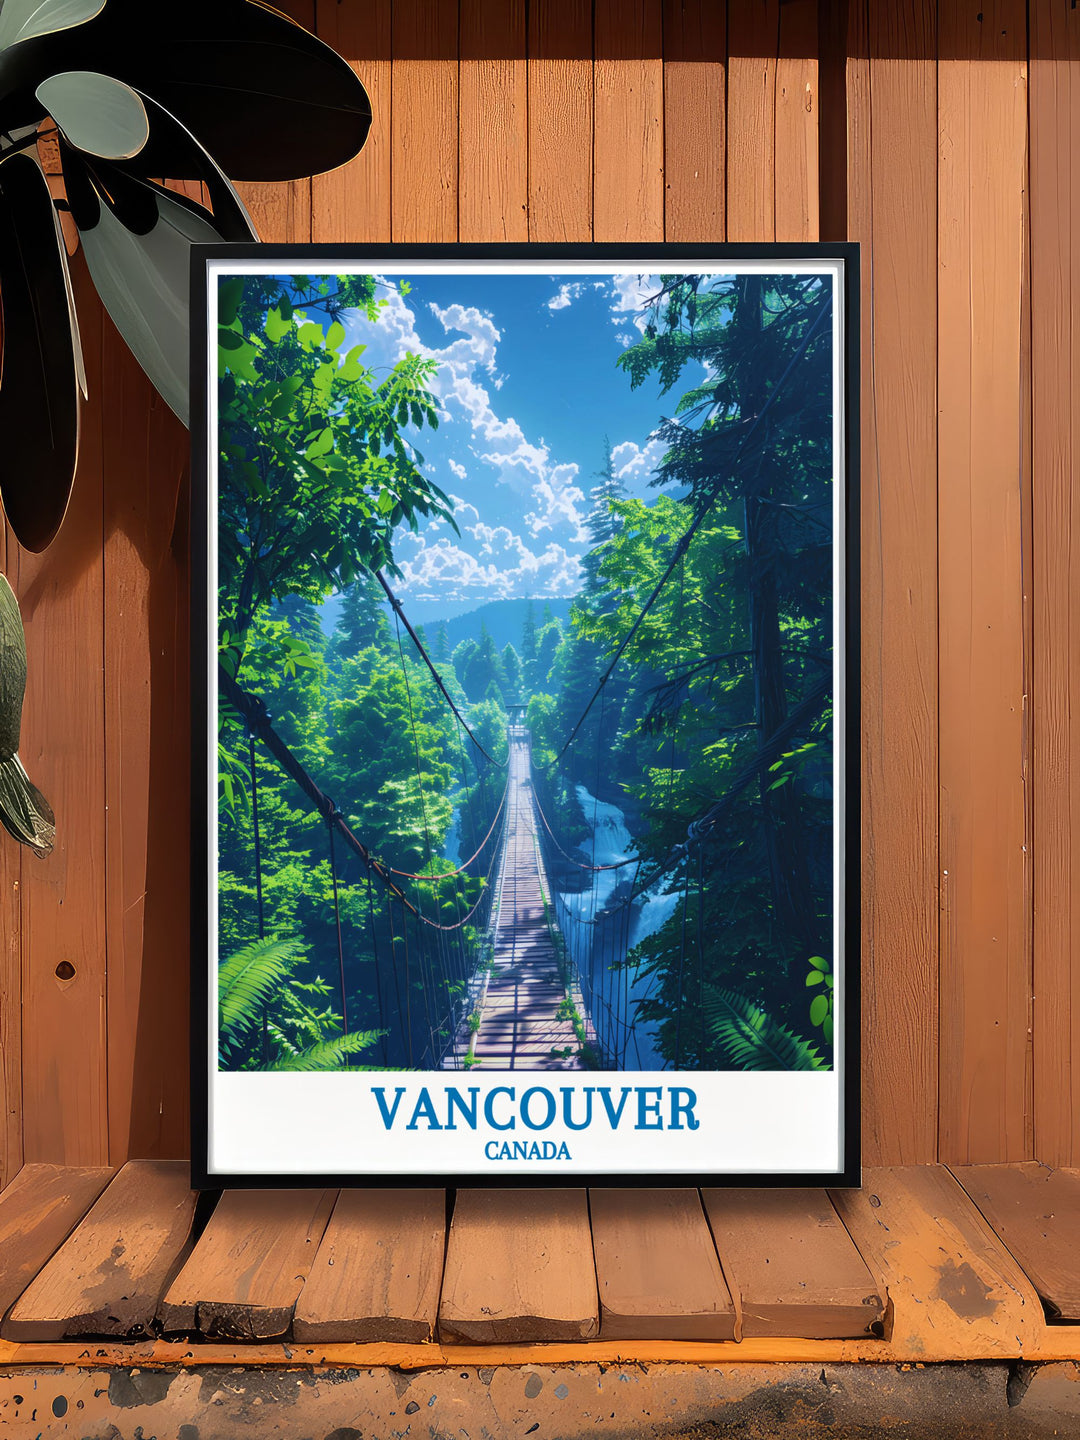 Celebrate the adventure and history of the Capilano Suspension Bridge with this art print. The vibrant colors and detailed illustration bring the iconic bridge and its lush environment into your home, perfect for adventure and nature enthusiasts.